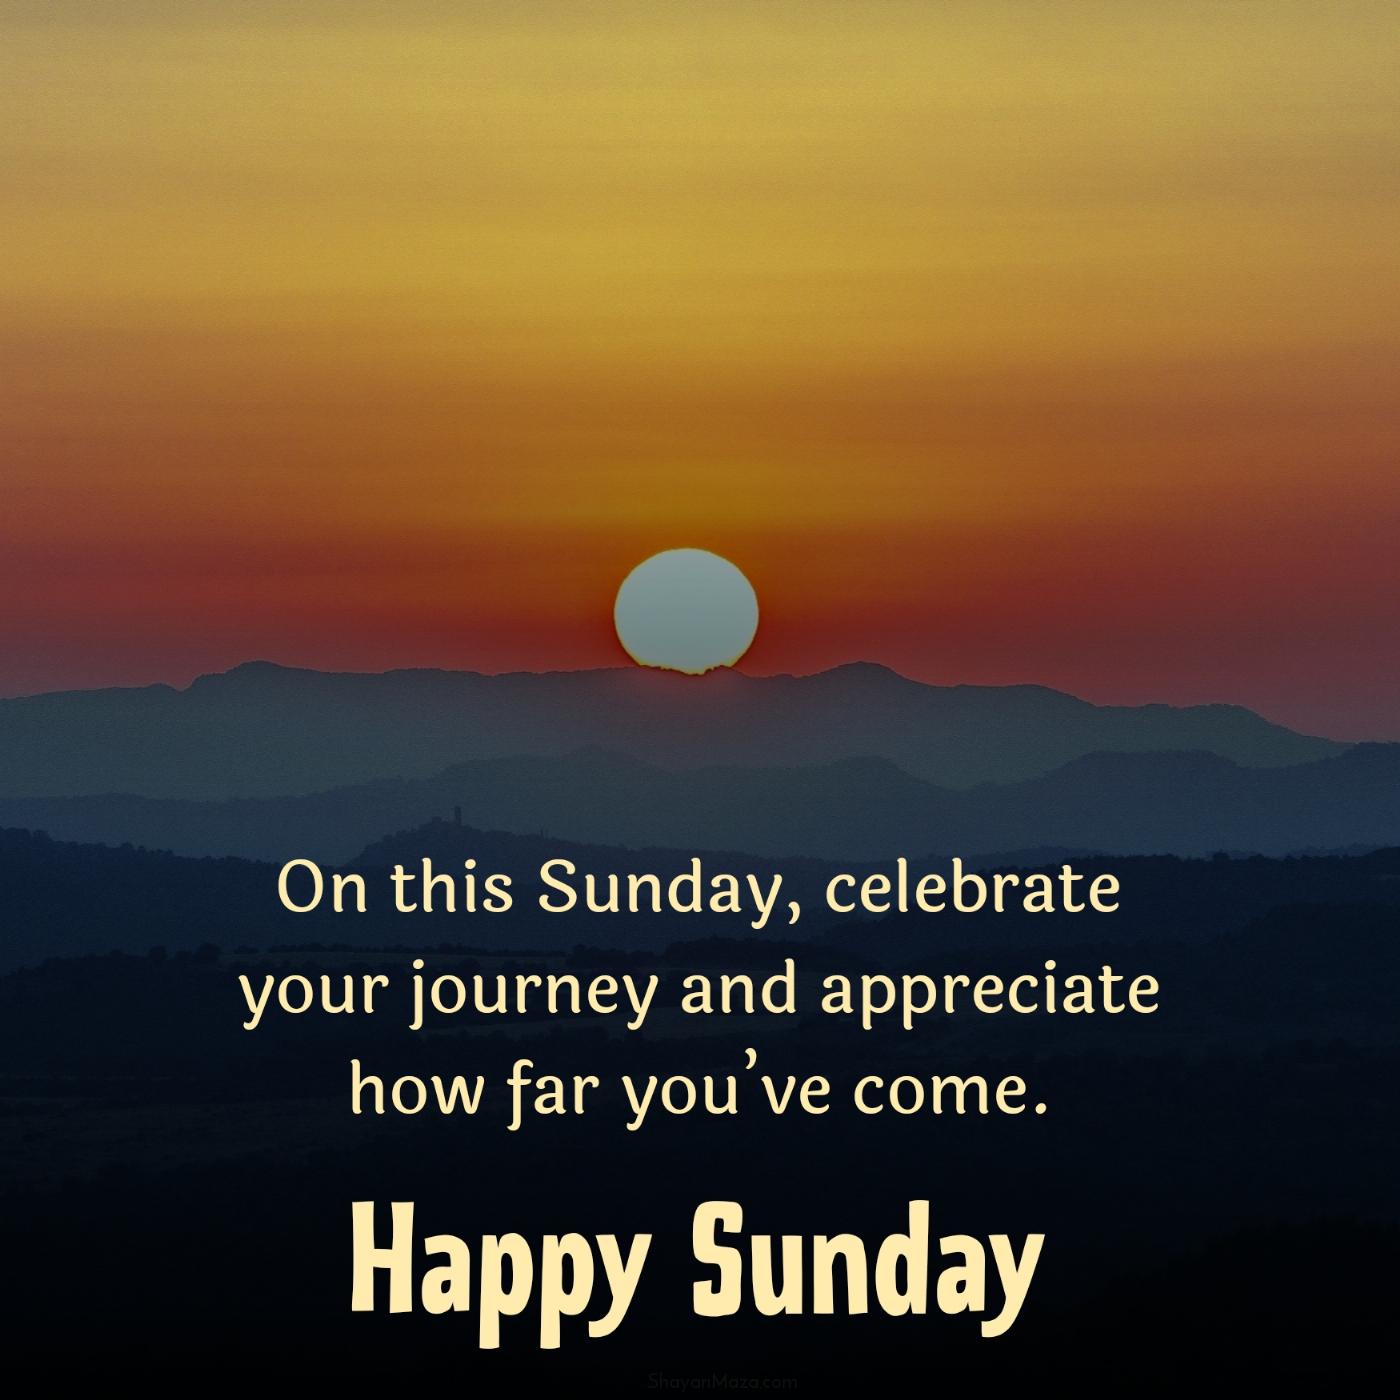 On this Sunday celebrate your journey and appreciate how far